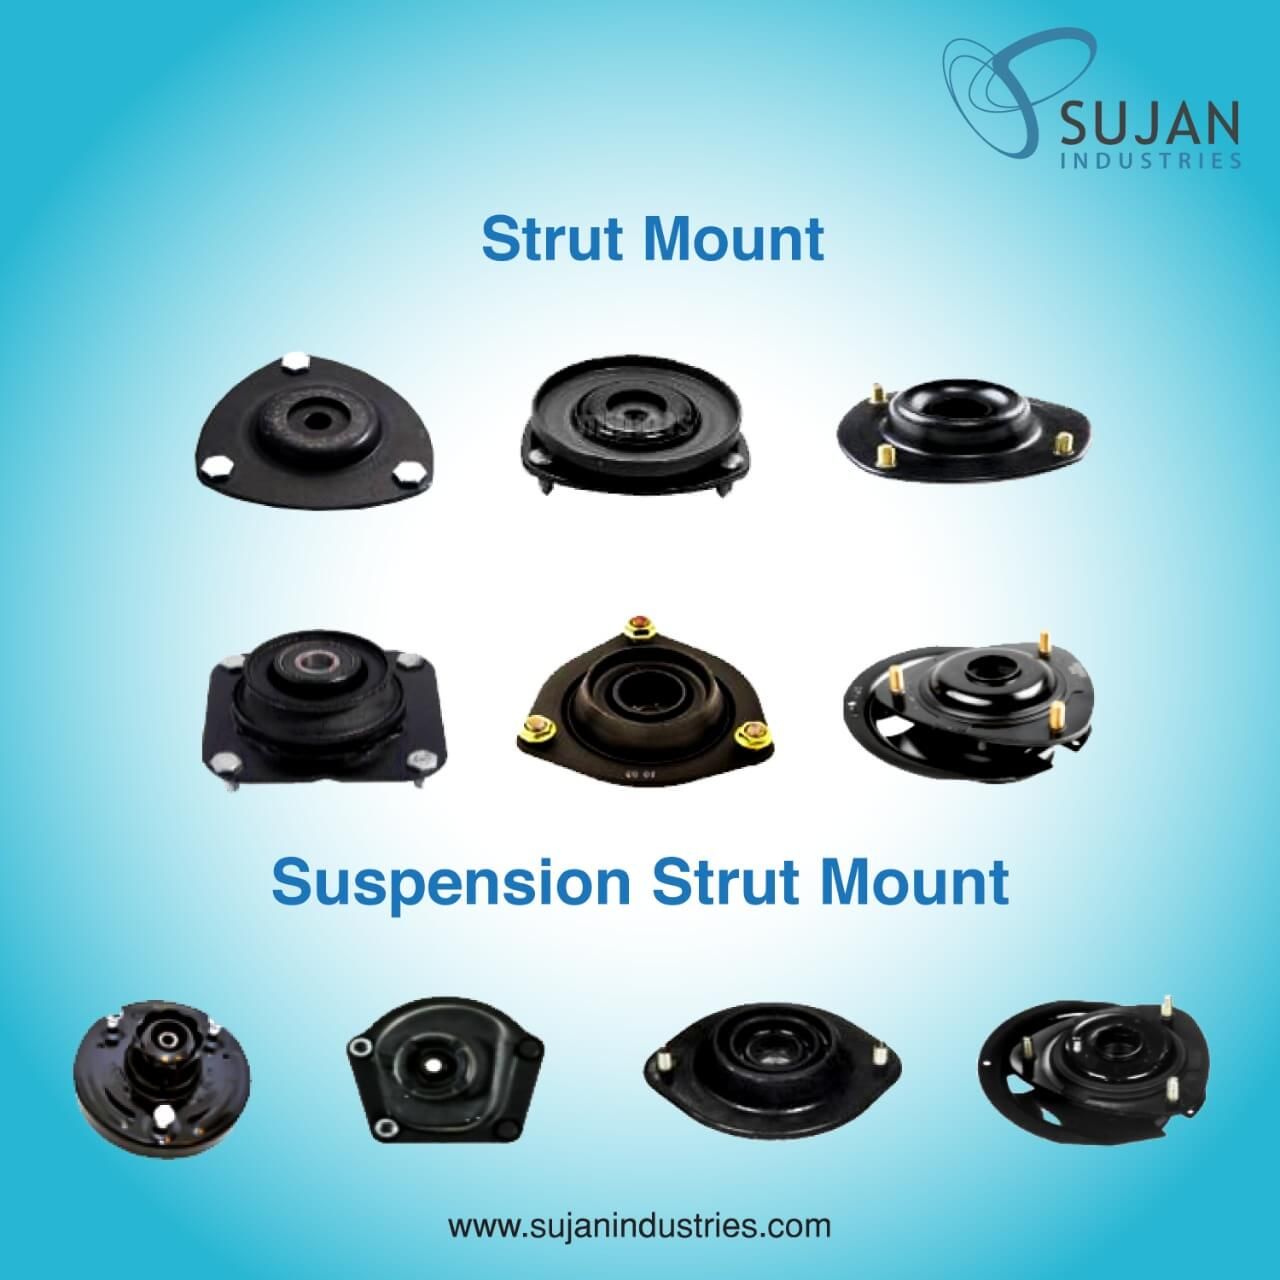 Where You Can Get Best Quality Strut Mount and Suspension Strut Mount at Best Price in India?